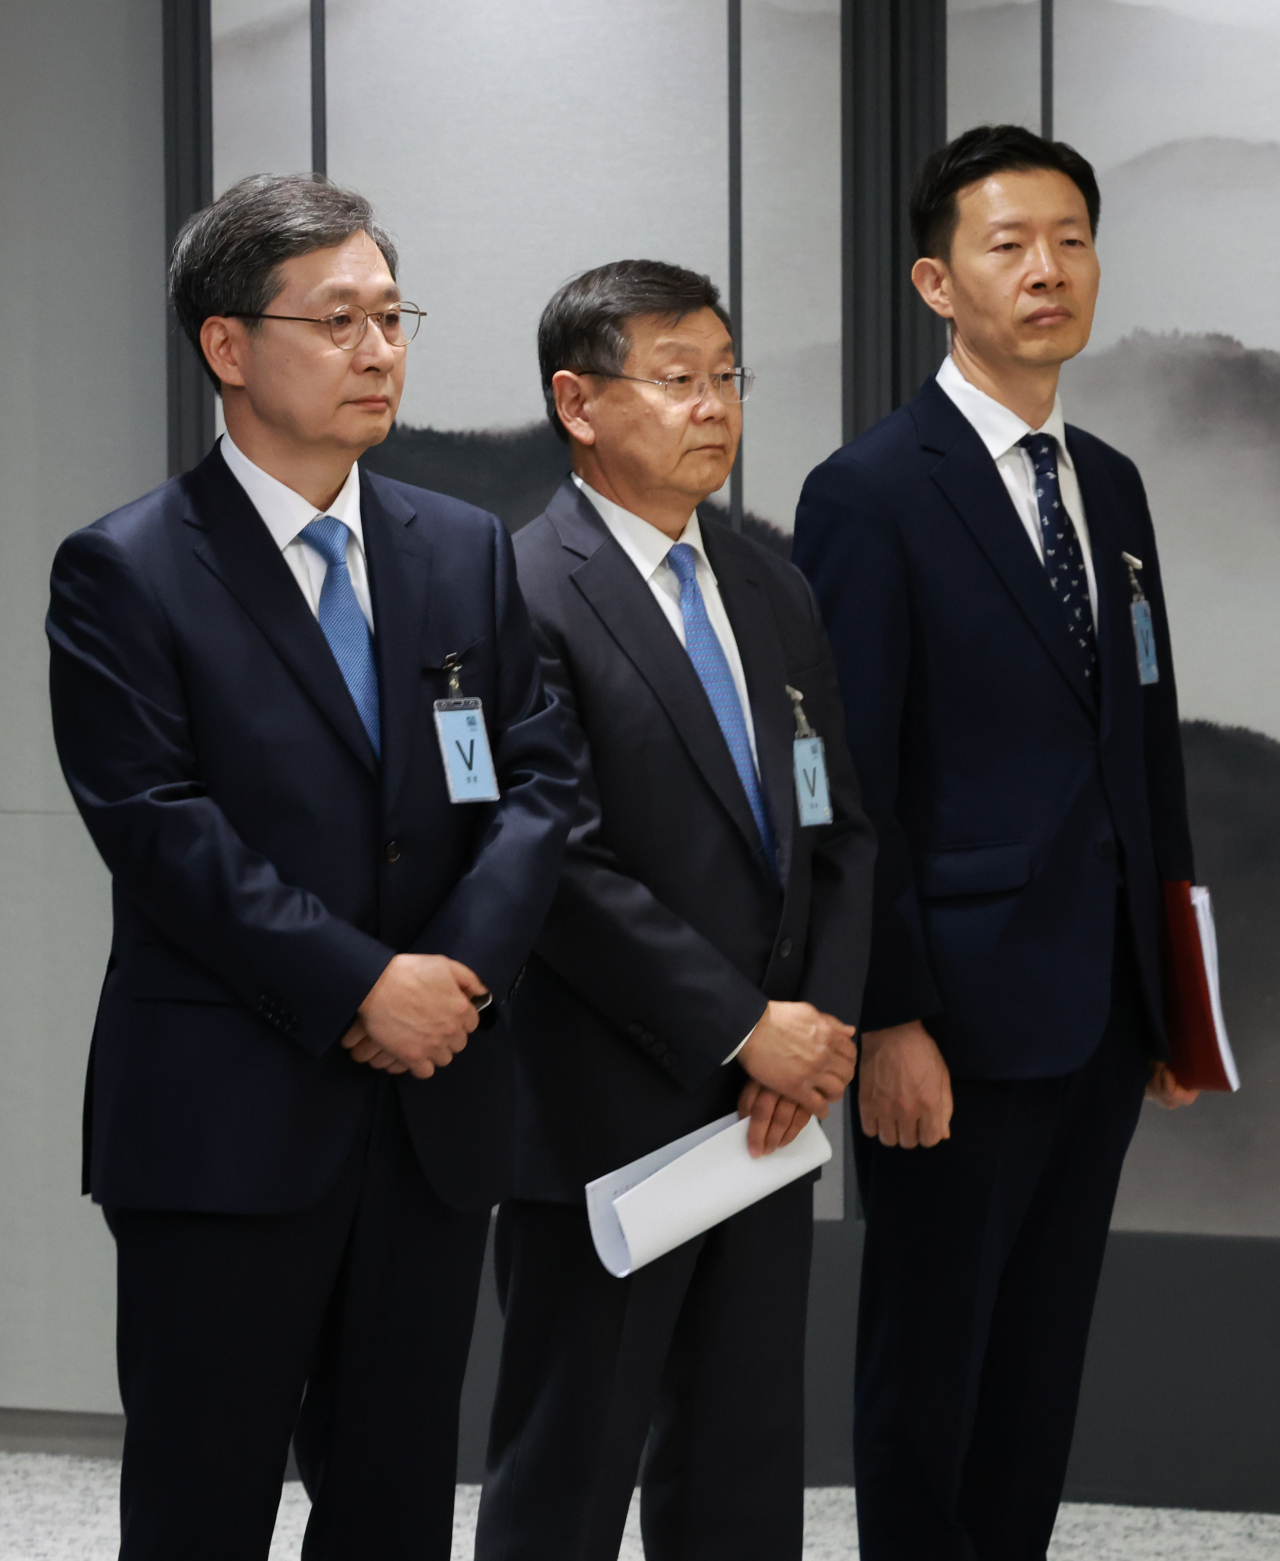 From left: Yoon Young-bin, nominee for the administrator of the Korea AeroSpace Administration; John Lee, nominee for KASA deputy administrator for mission directorates; Rho Kyung-won, nominee for KASA deputy administrator. (Yonhap)